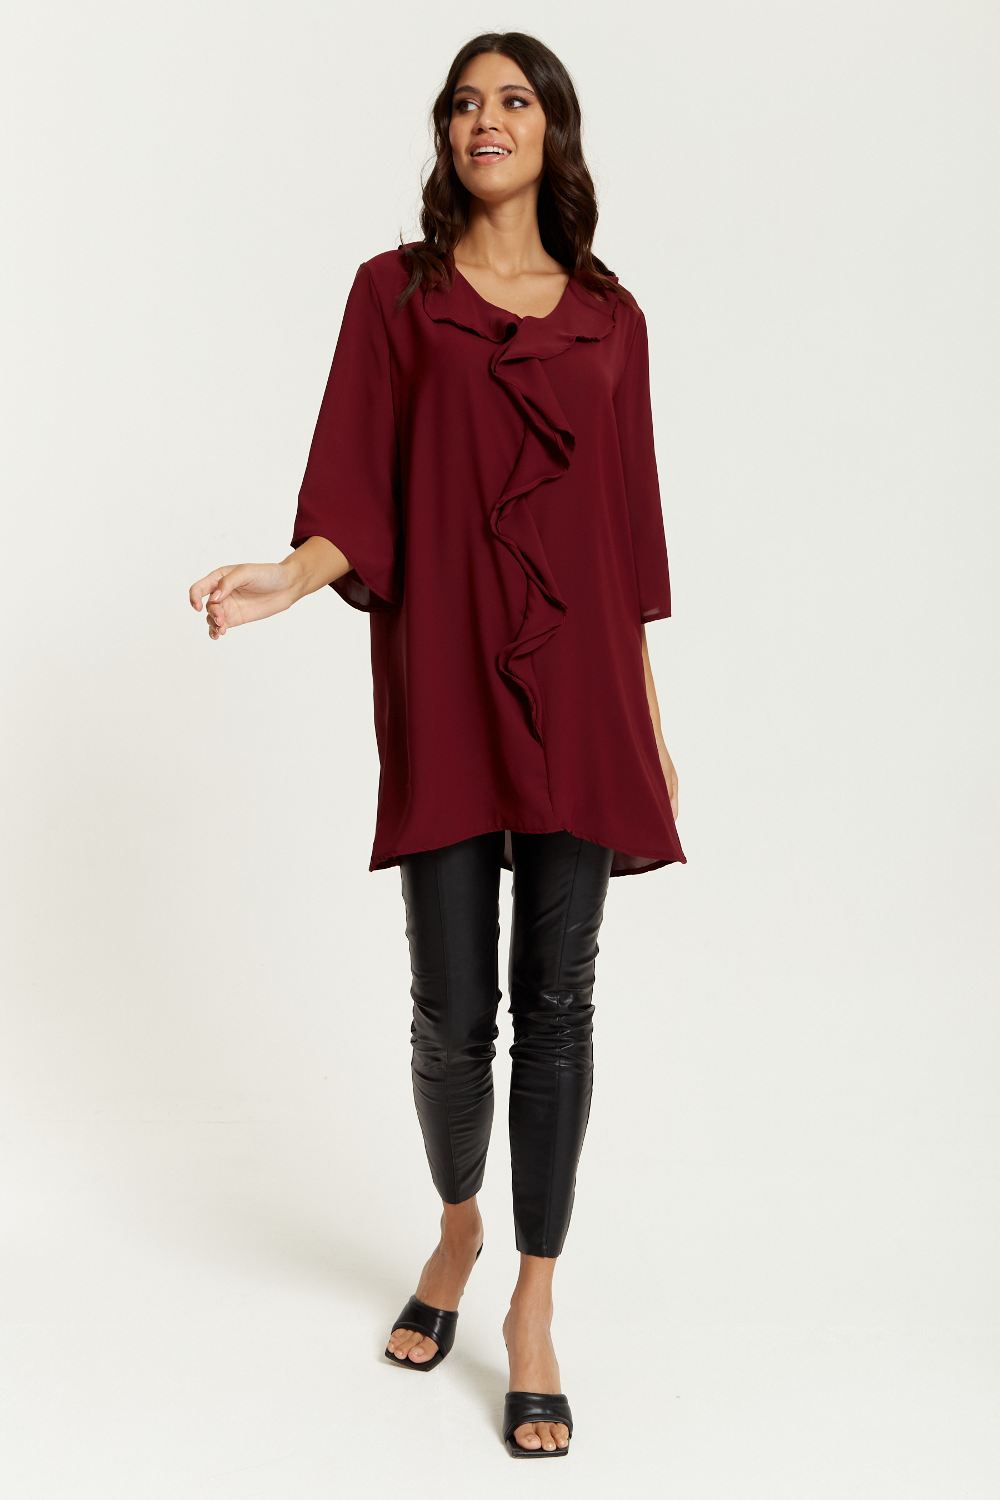 Oversized Frill Detailed 3/4 Sleeves Tunic Shirt in Burgundy GLR FASHION NETWORKING